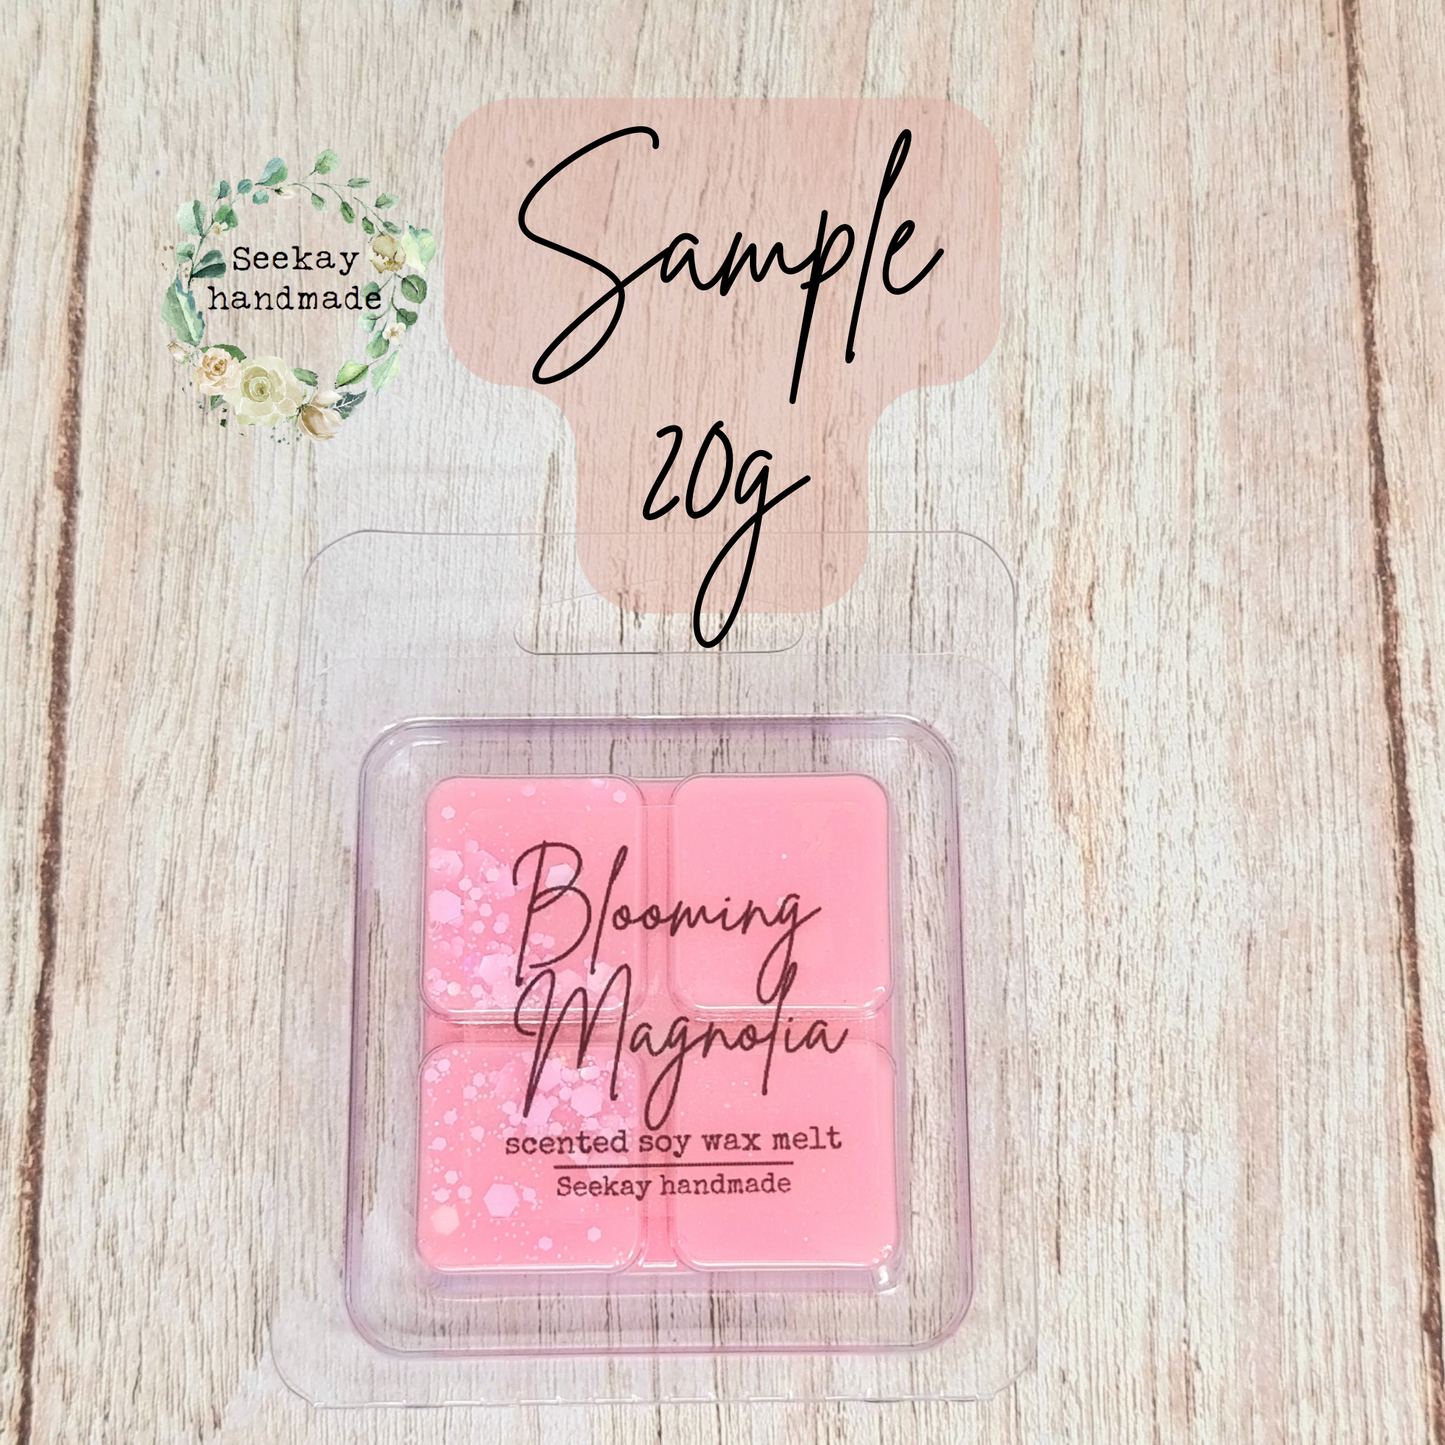 Blooming Magnolia inspired soy wax melt